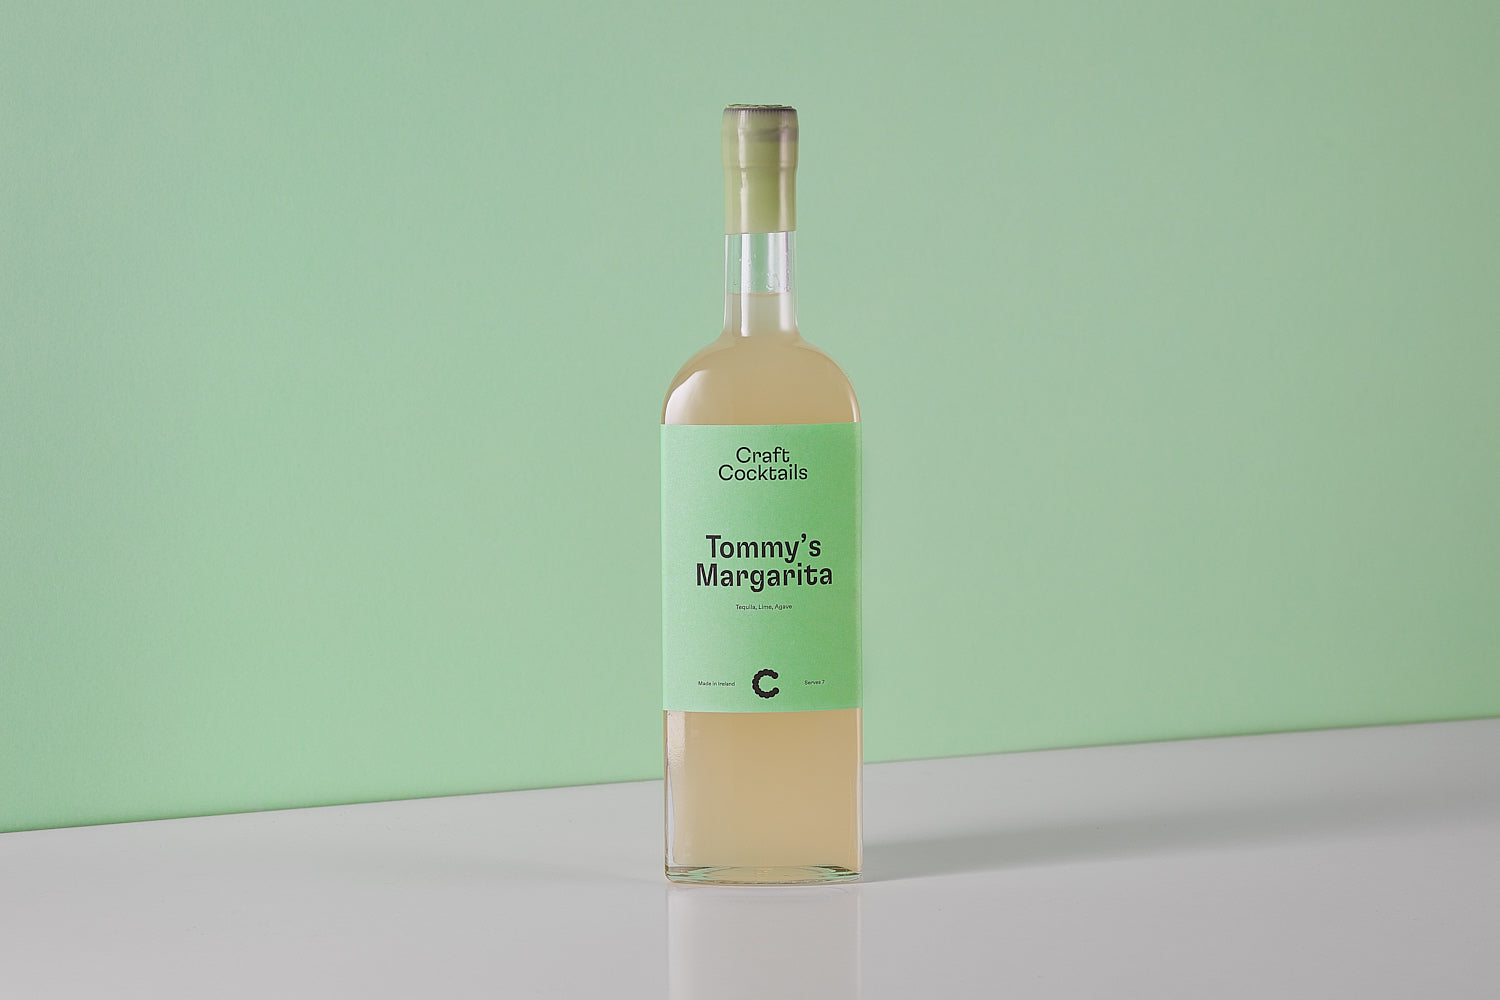 Craft Cocktails - Tommy’s Margarita 15.20% ABV 700ml